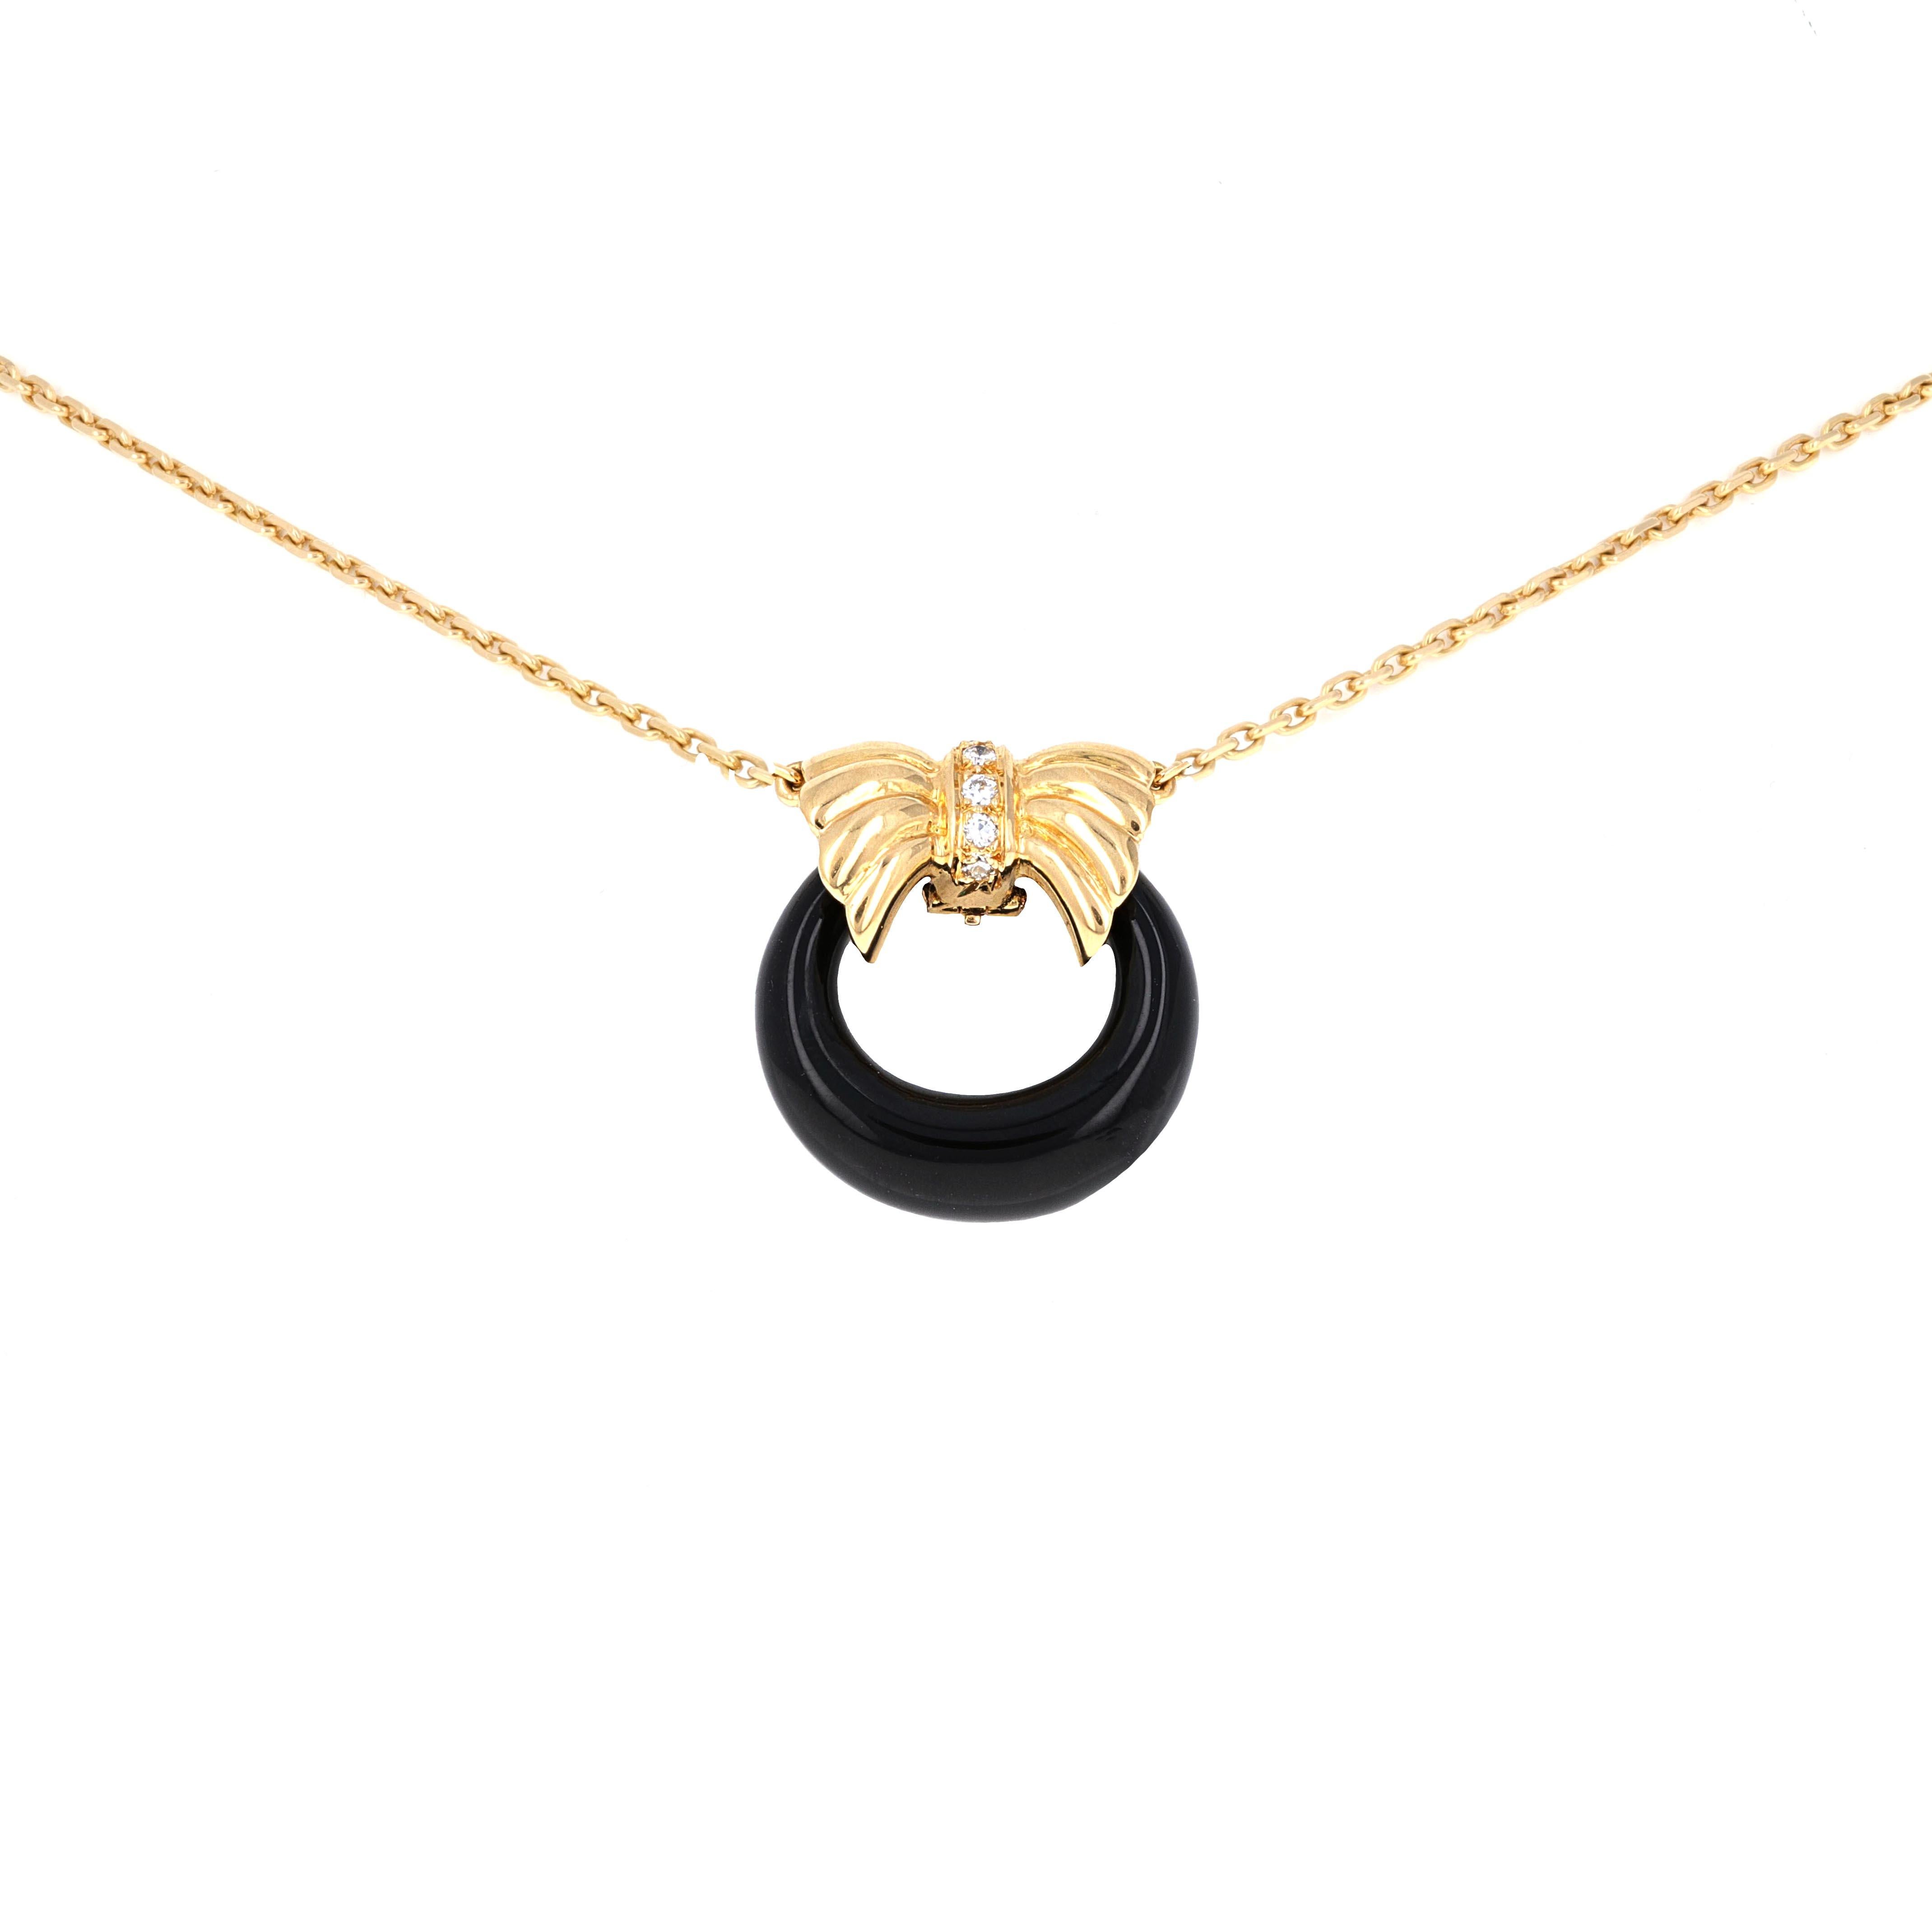 18k Yellow Gold Diamond Interchangable Pendant Necklace by Van Cleef & Arpels . This necklace comes with 3 interchangeable pendants. The pendants are Chalcedony, Black Onyx and Jade. The pendant closure has 5 round brilliant diamonds weighing an